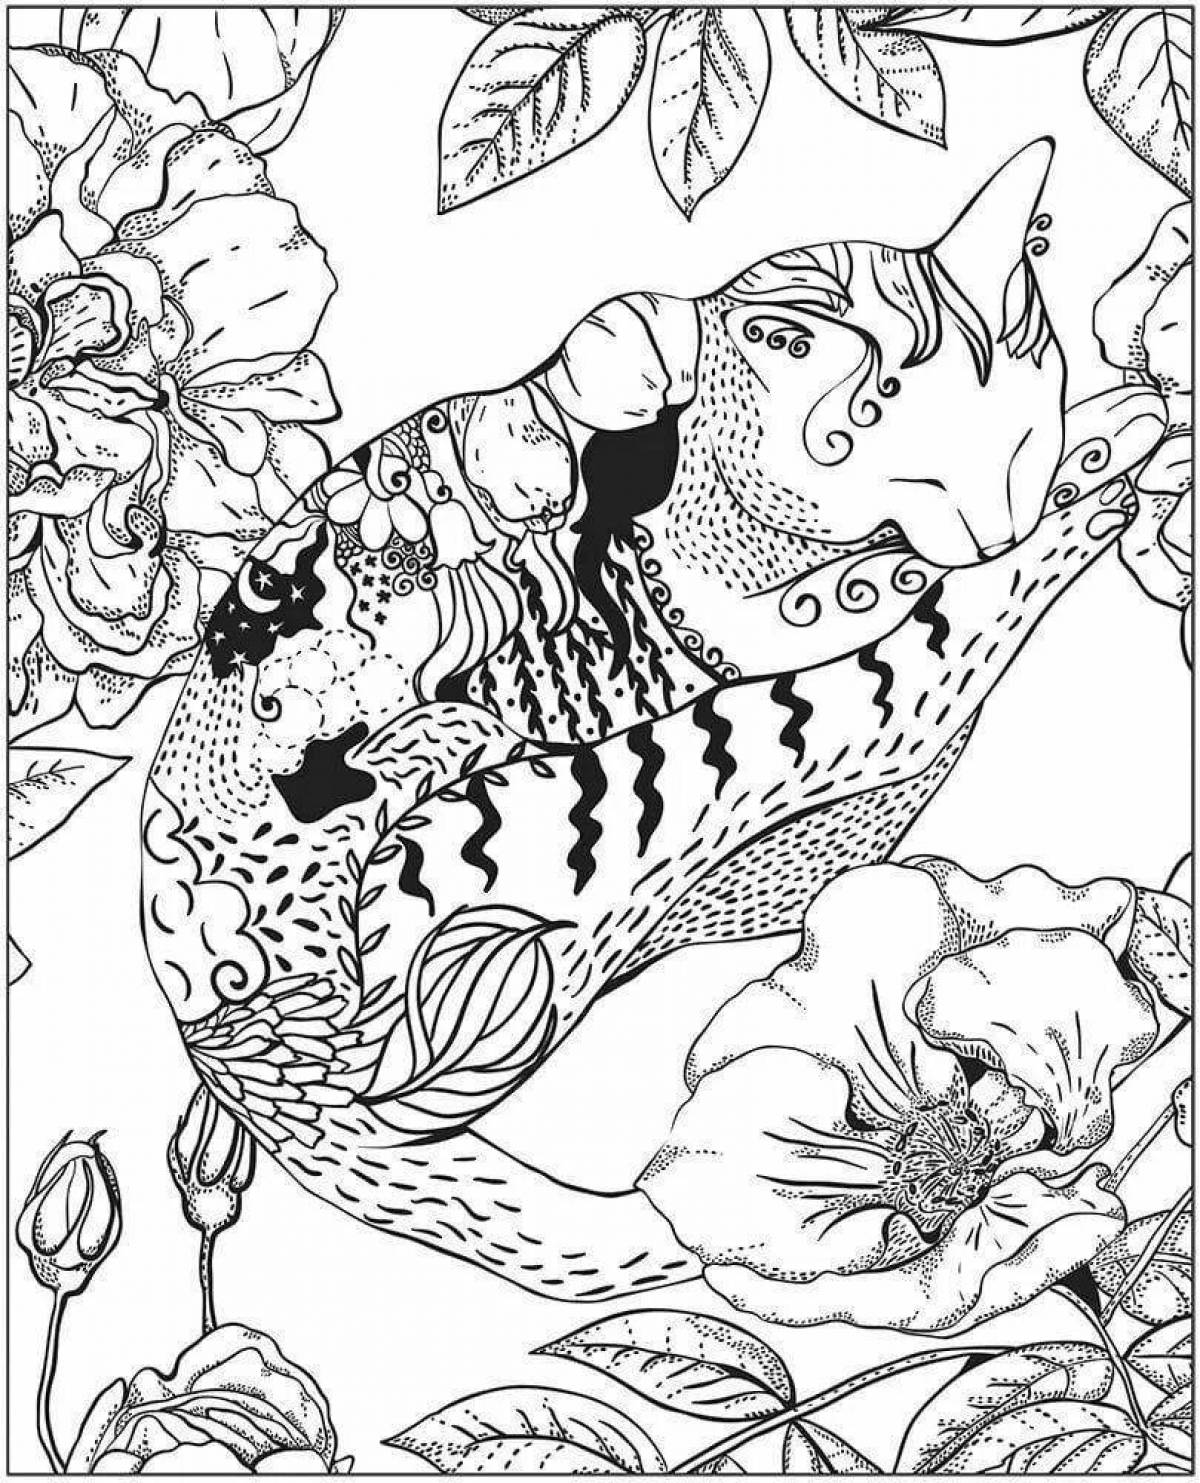 Intricate Chinese coloring page